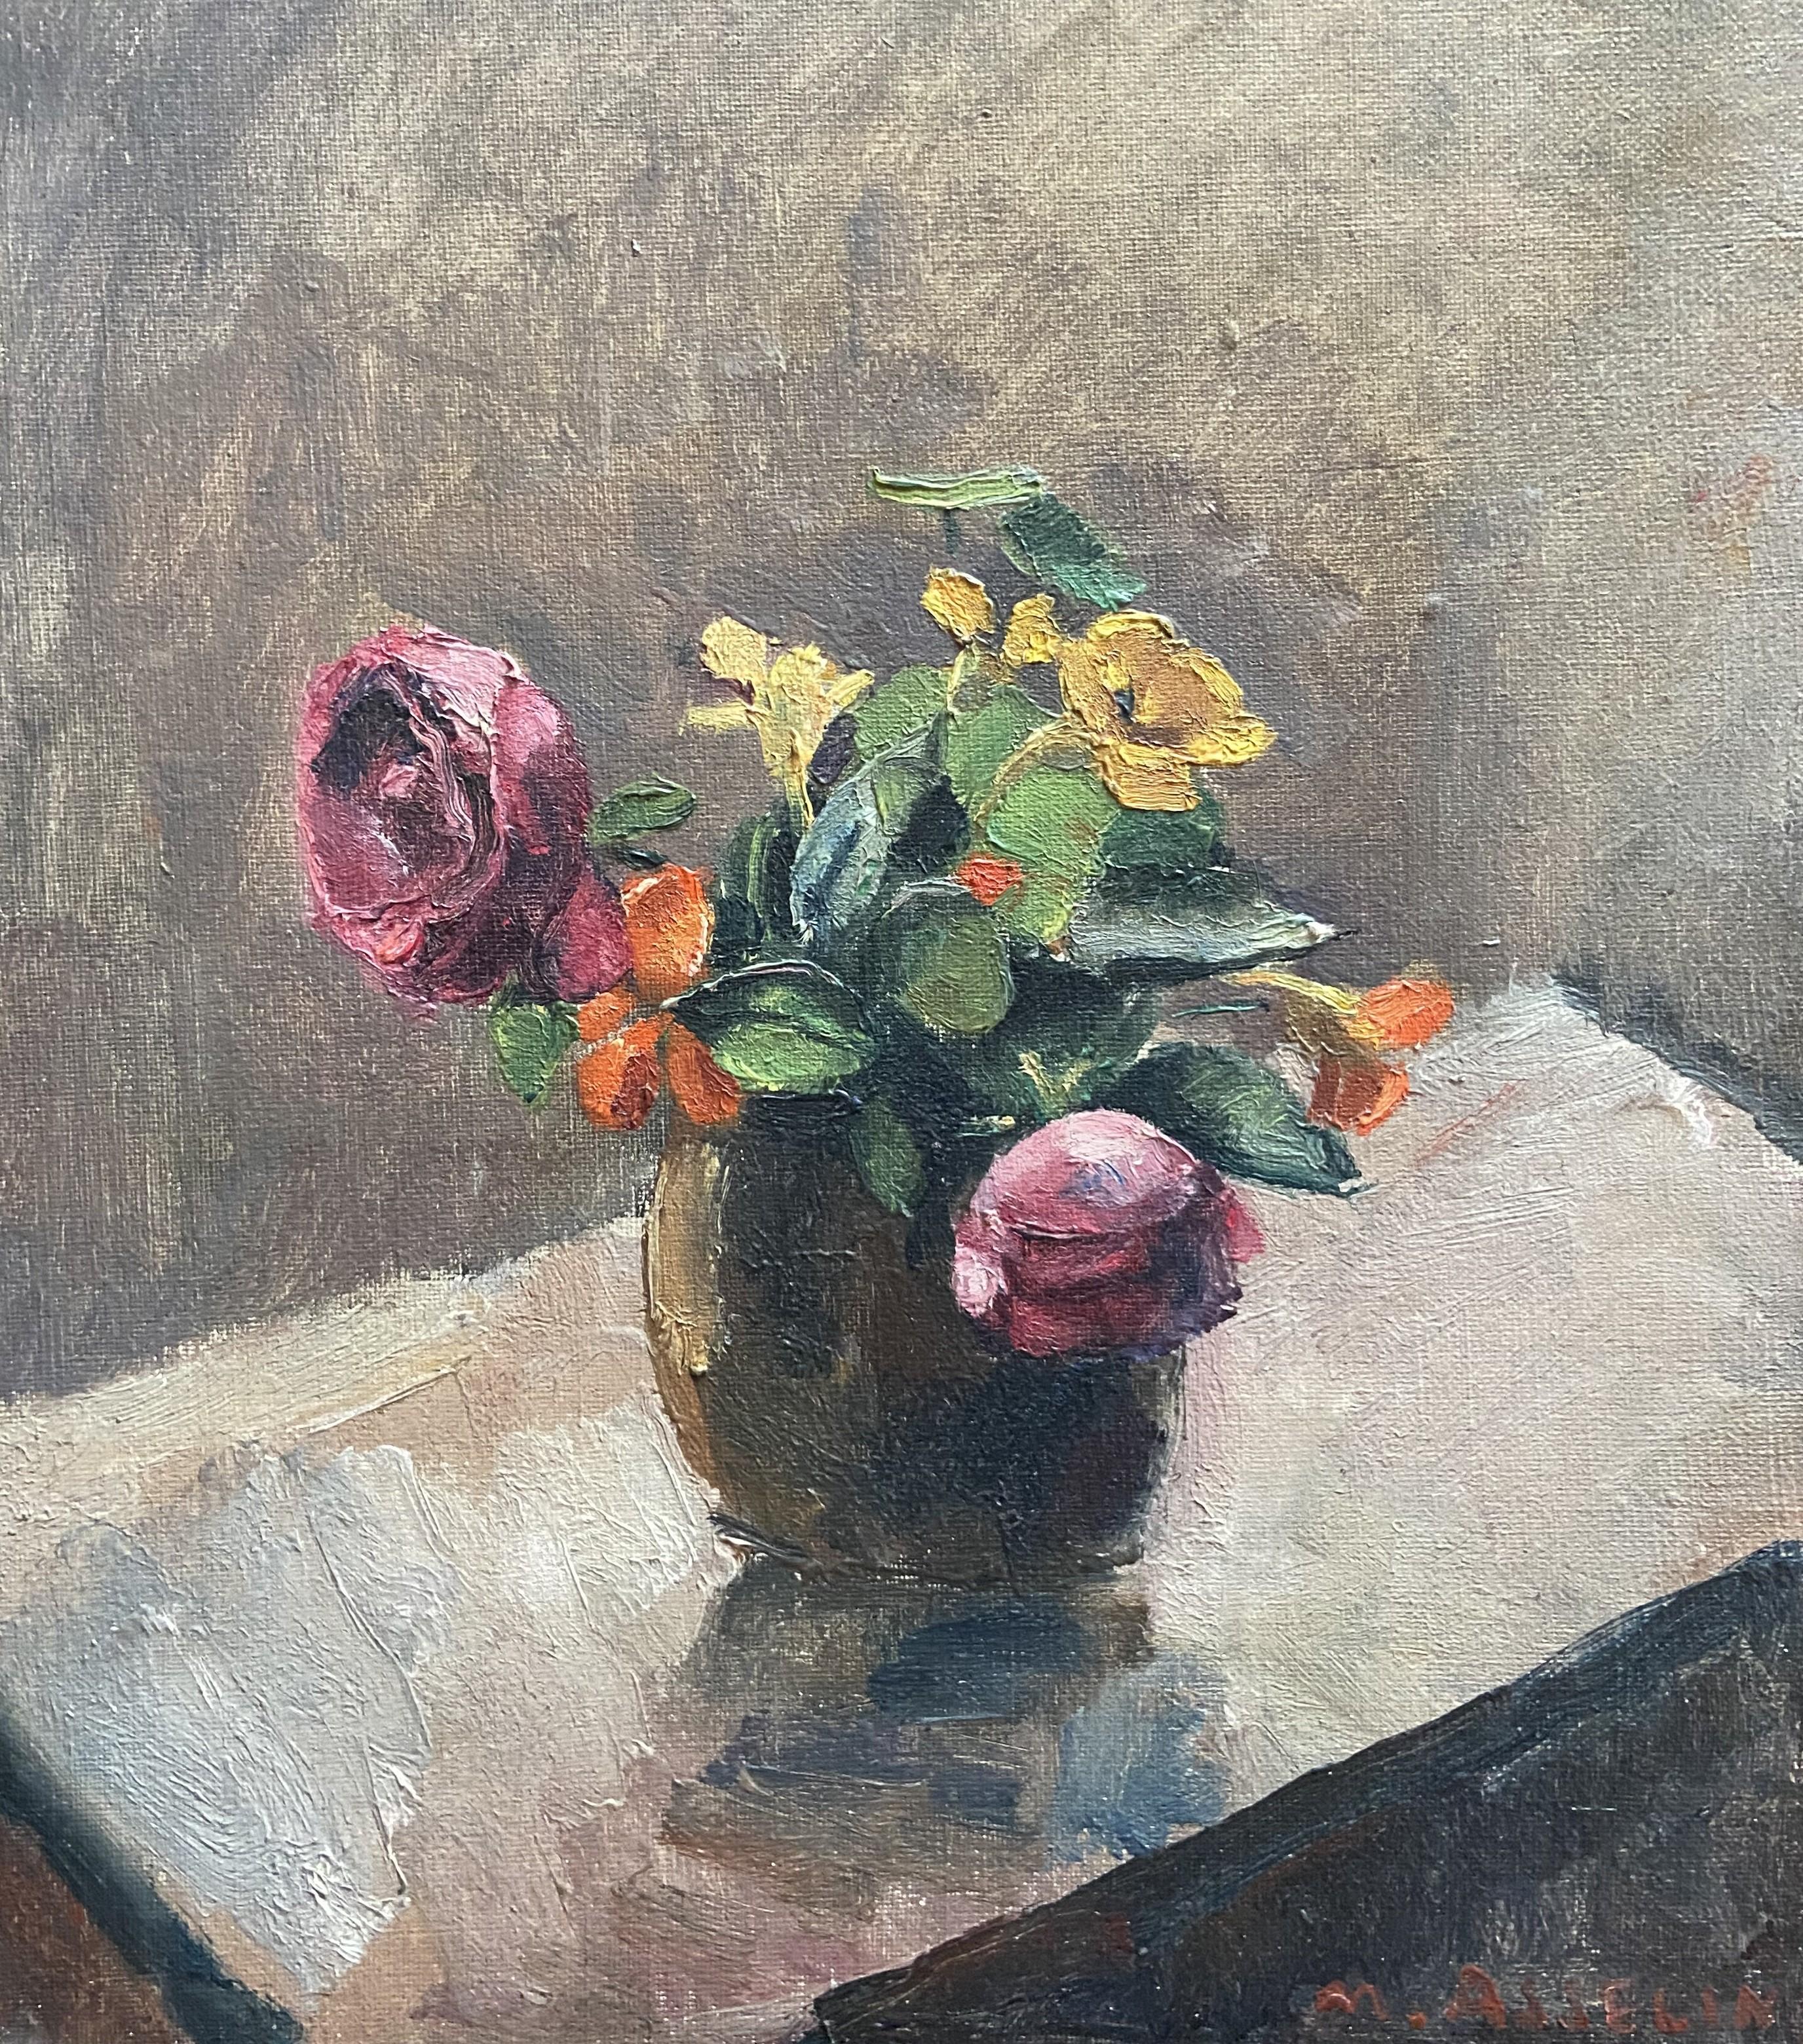 Maurice Asselin (1882-1947) 
A Bouquet of roses and nasturtiums
Signed lower right
Oil on cardboard canvas
In good condition
39.5 x 31.5 cm
Framed : 58.5 x 51.5 cm

Maurice Asselin was particularly fond of painting bouquets of flowers, some of which